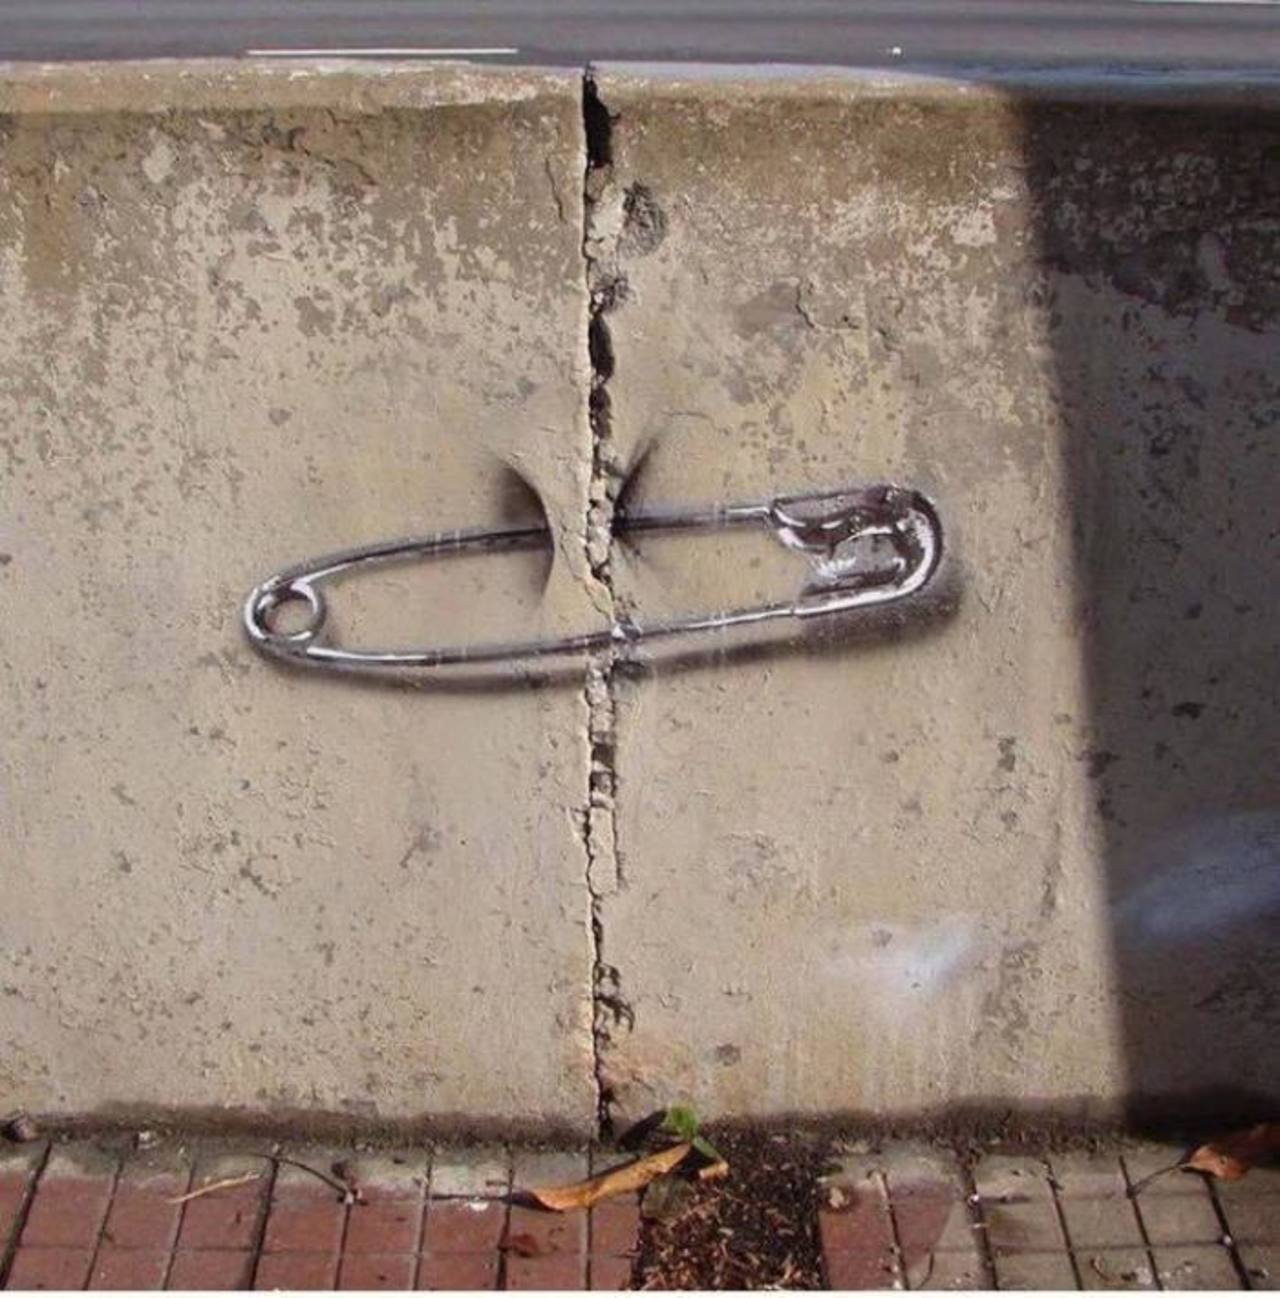 Simple & Beauty – #Creative #Streetart | Be ▲rtist - Be ▲rt https://beartistbeart.com/2016/08/25/simple-beauty-creative-streetart/?utm_campaign=crowdfire&utm_content=crowdfire&utm_medium=social&utm_source=twitter https://t.co/iKa9ouxB2r